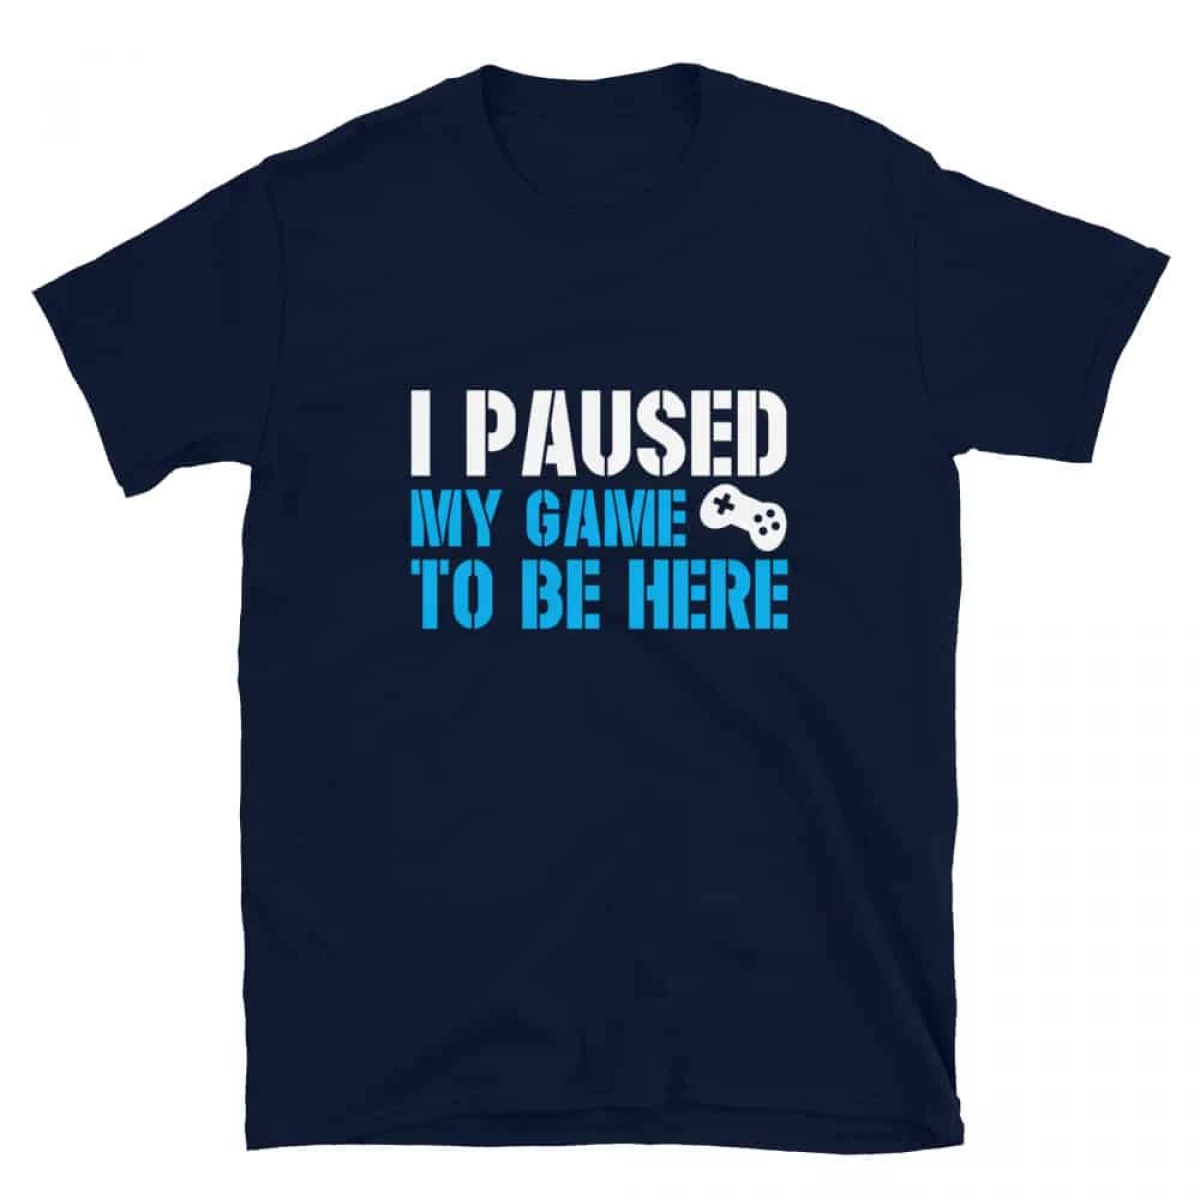 Loudpig I Paused my Game to be here t-shirt